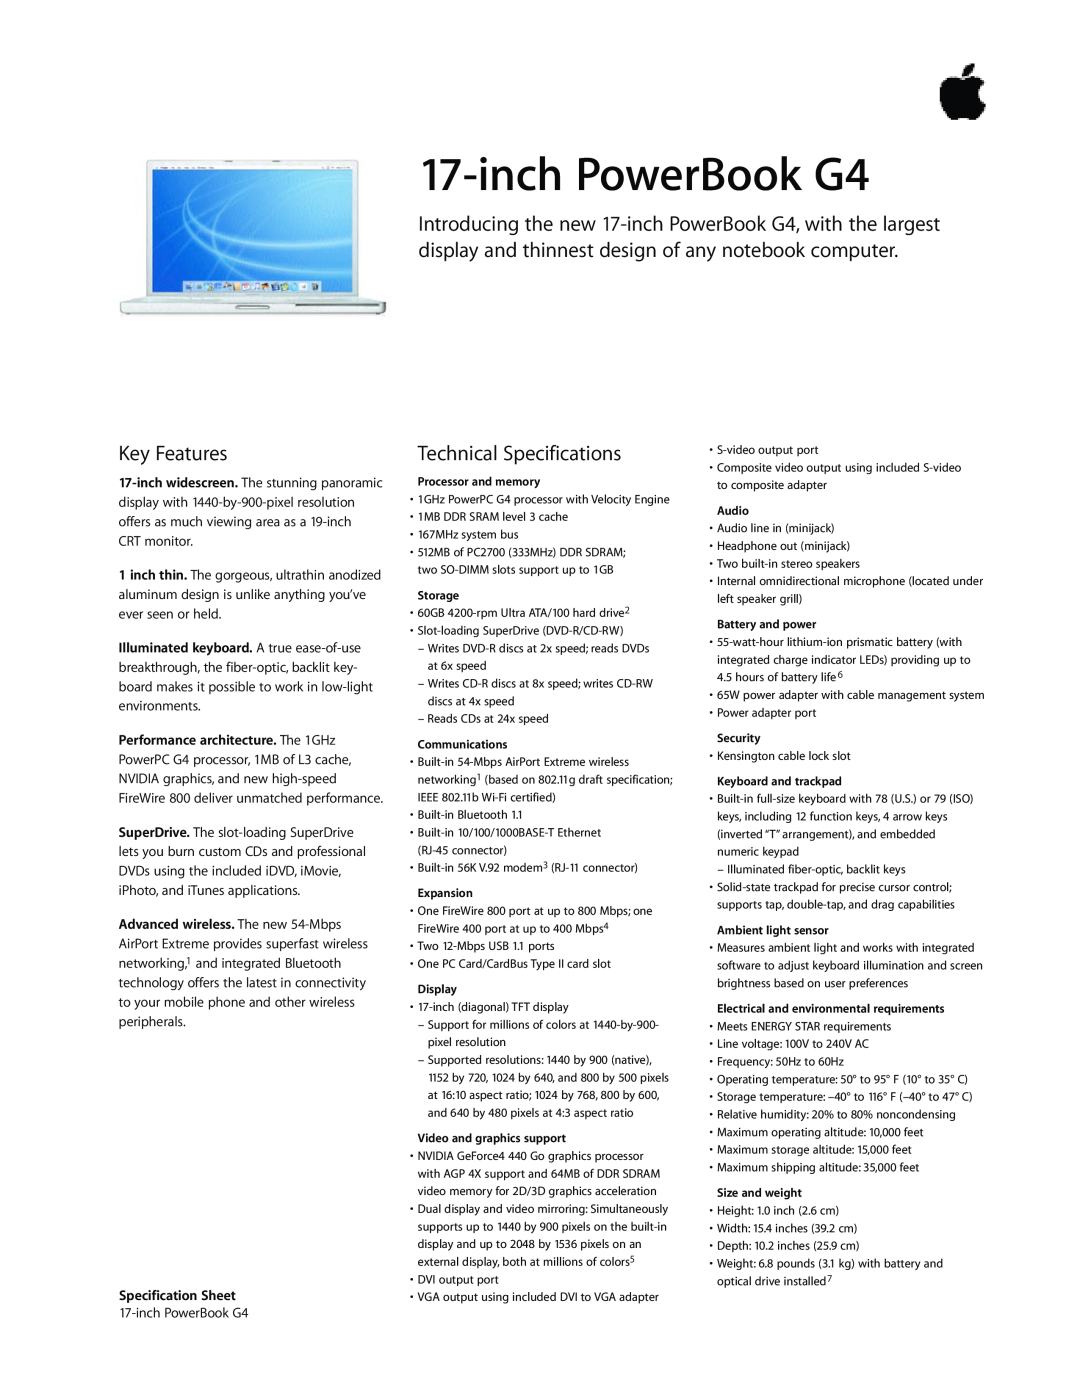 Apple Laptop PC technical specifications Key Features, Technical Specifications, Specification Sheet, inch PowerBook G4 